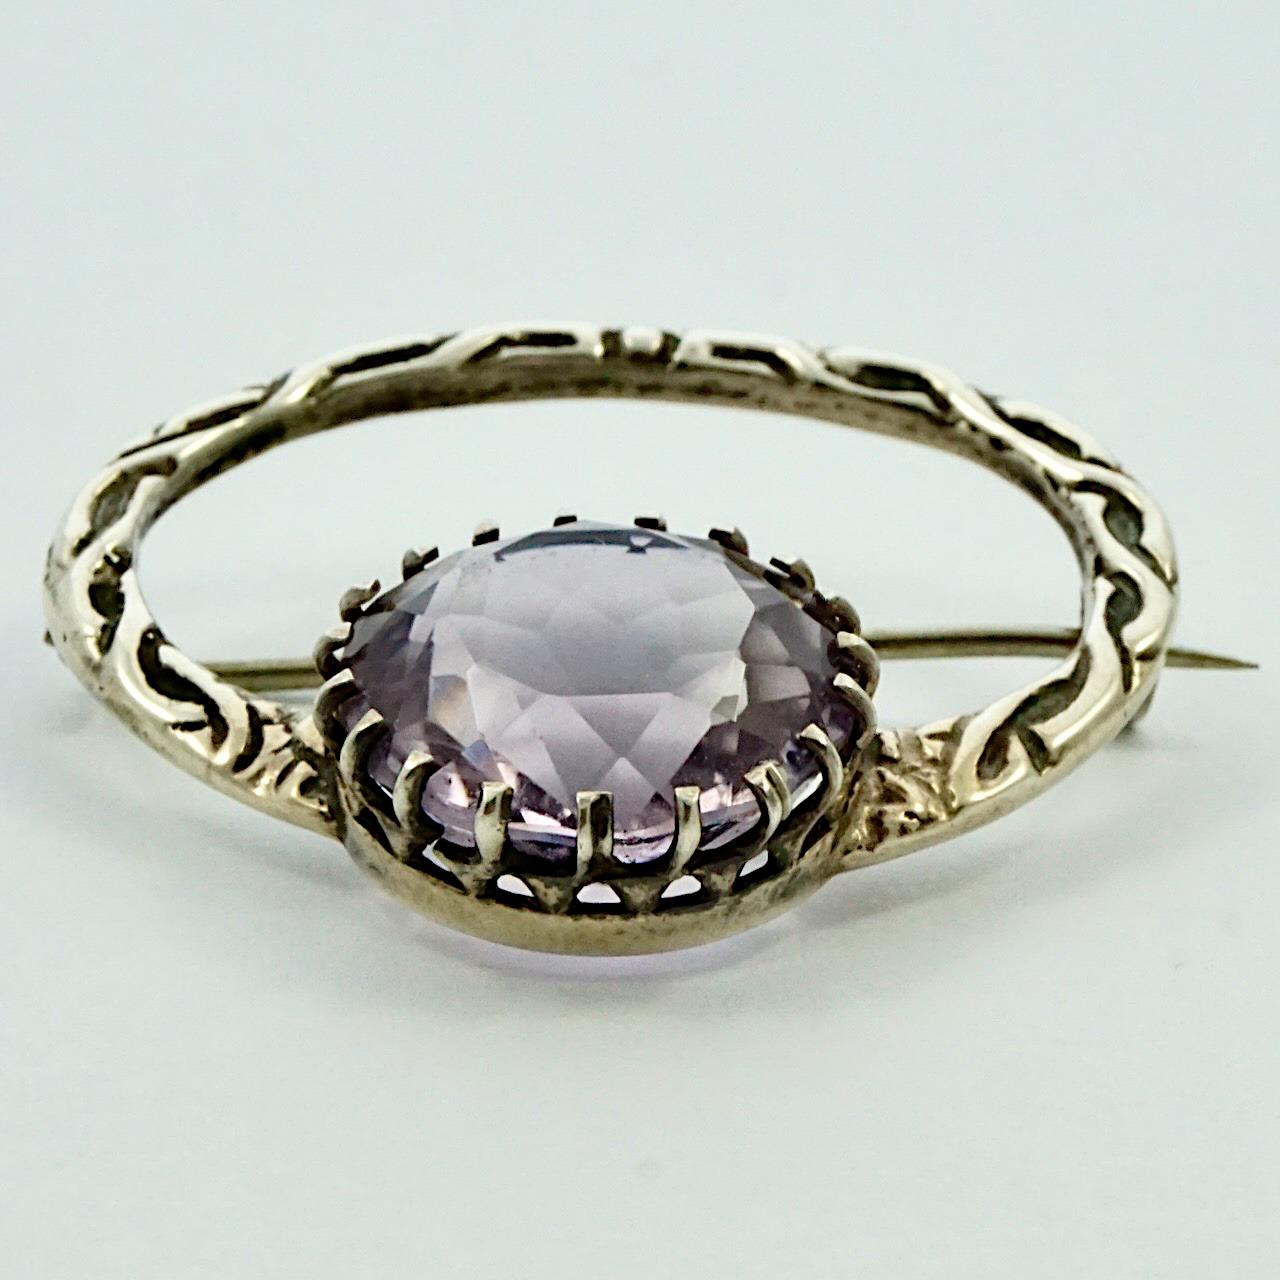 Wonderful antique Victorian silver brooch with Celtic decoration, and featuring a lovely large faceted faux amethyst. The brooch has the old 